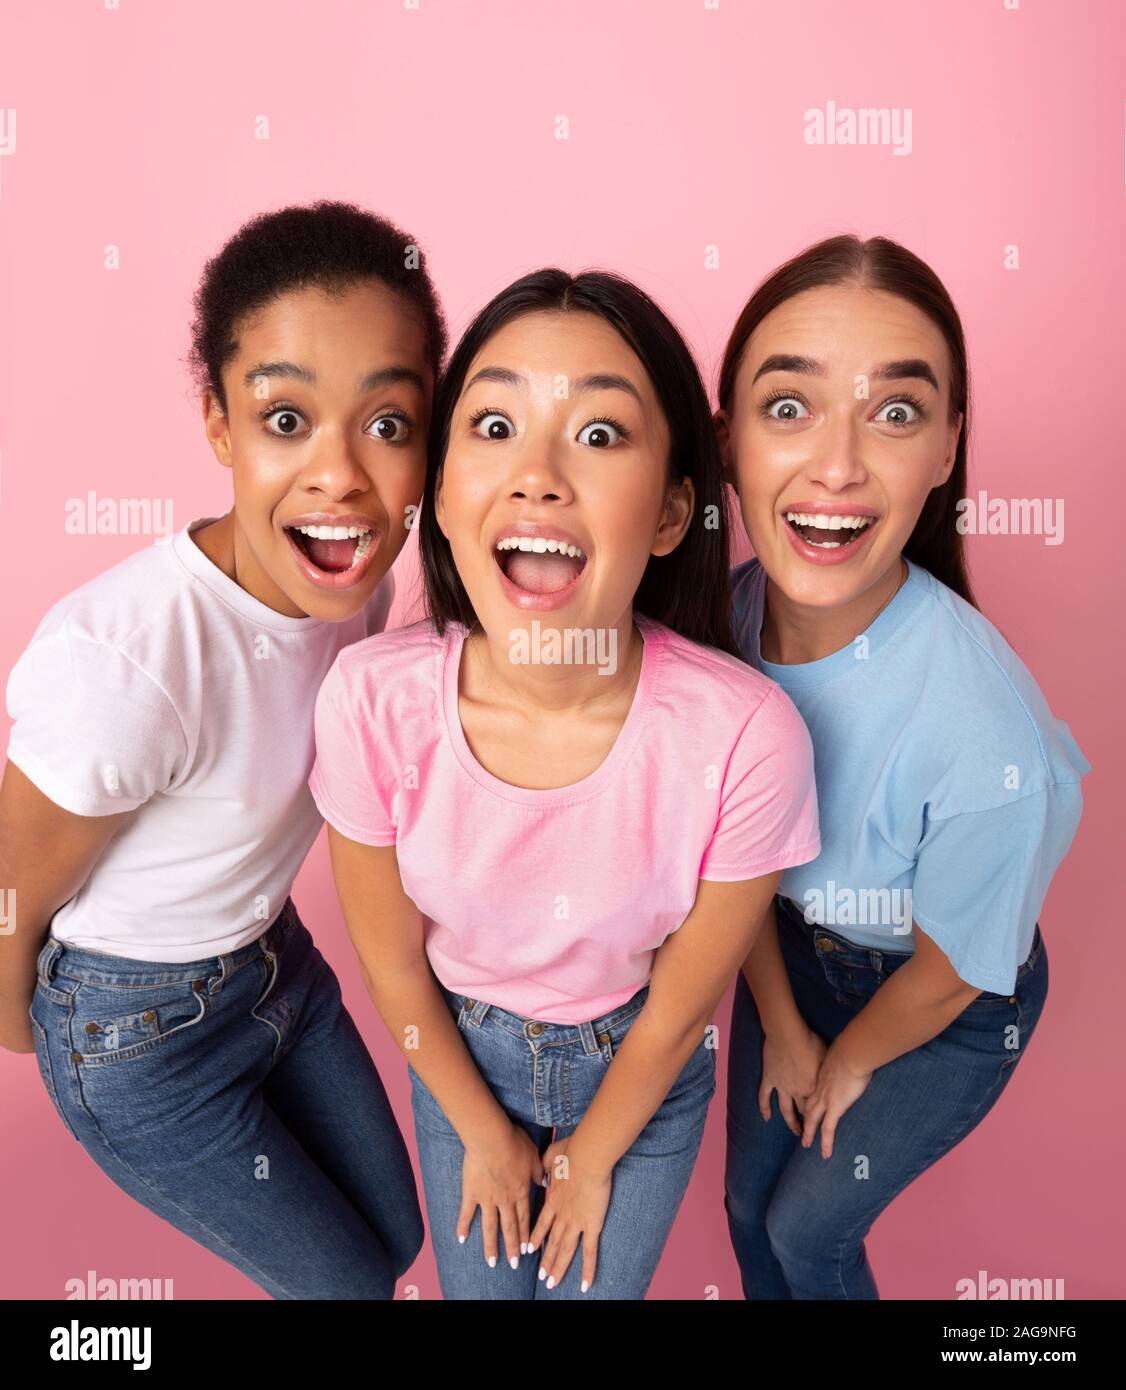 Trois Funny Girls Looking at Camera, permanent, High-Angle fond rose Banque D'Images